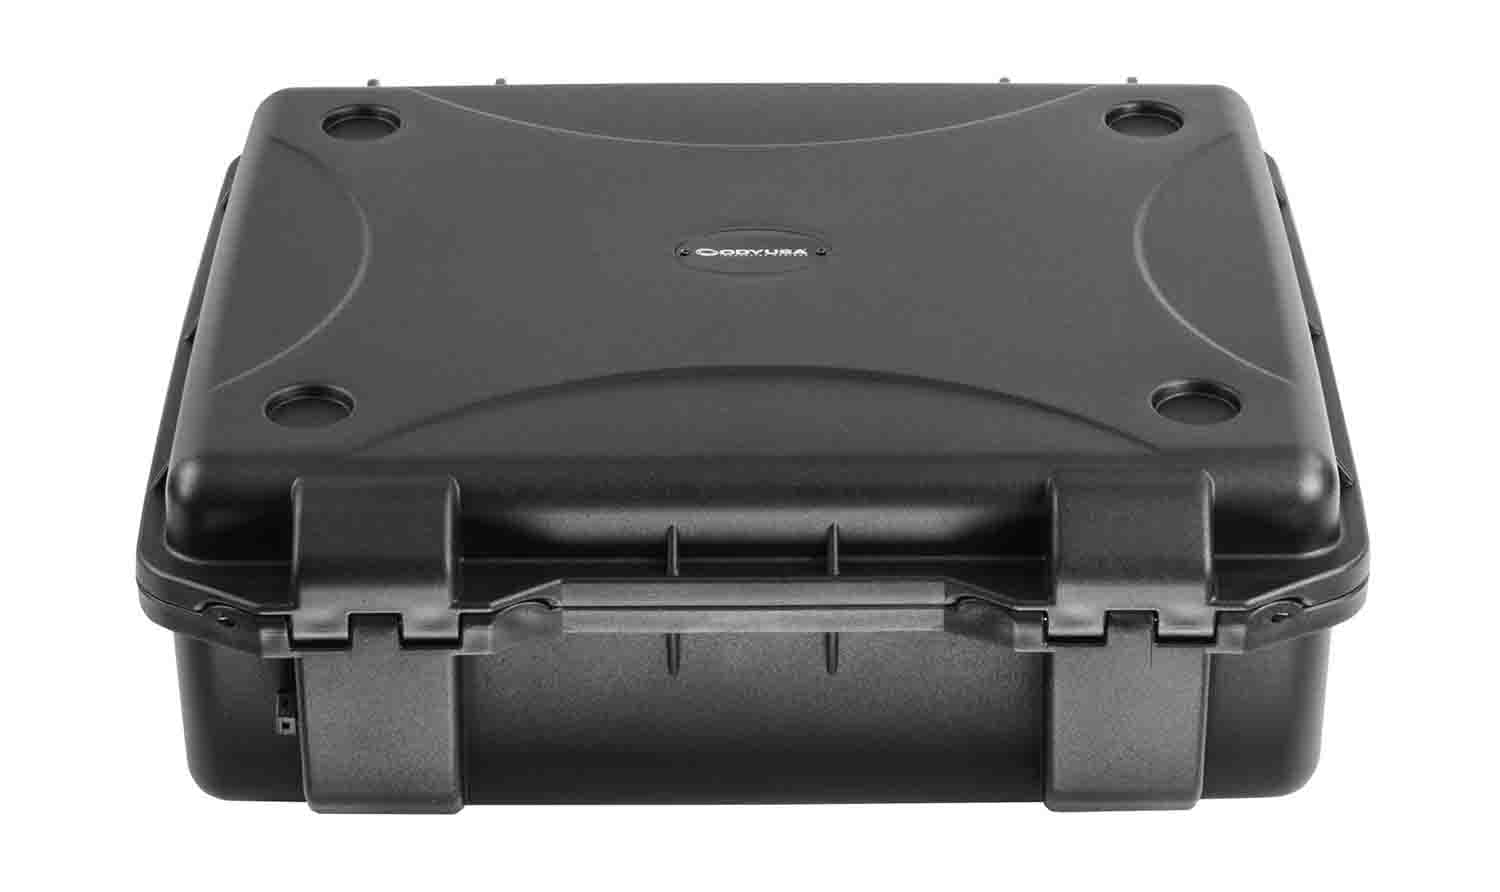 Odyssey VU161305 Vulcan Injection-Molded Utility Case with Pluck Foam - 17 x 13.25 x 3.75" Interior - Hollywood DJ